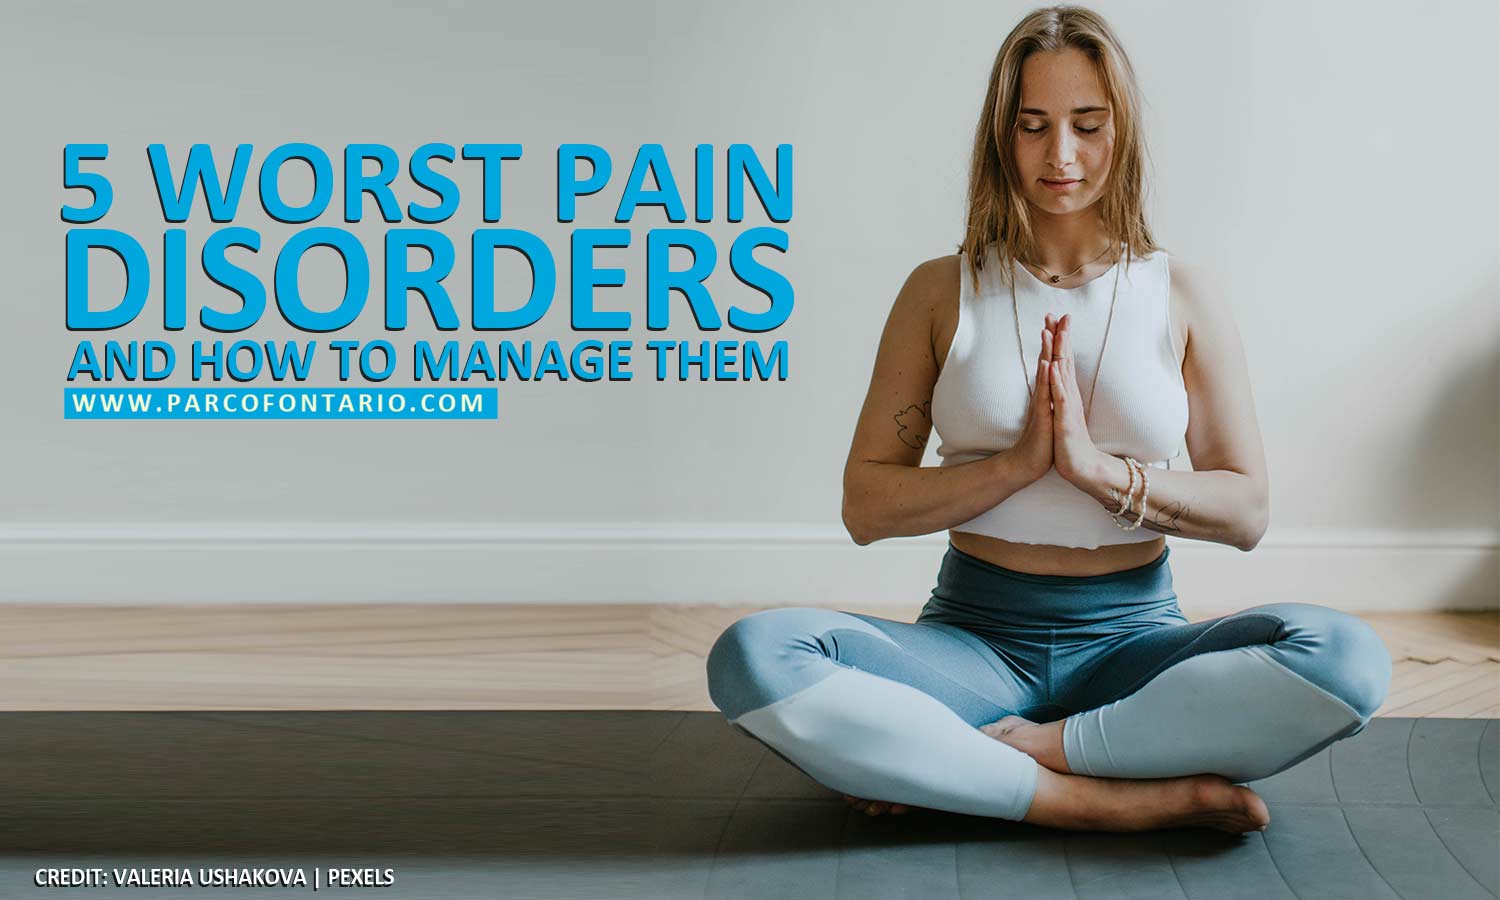 5 Worst Pain Disorders and How to Manage Them